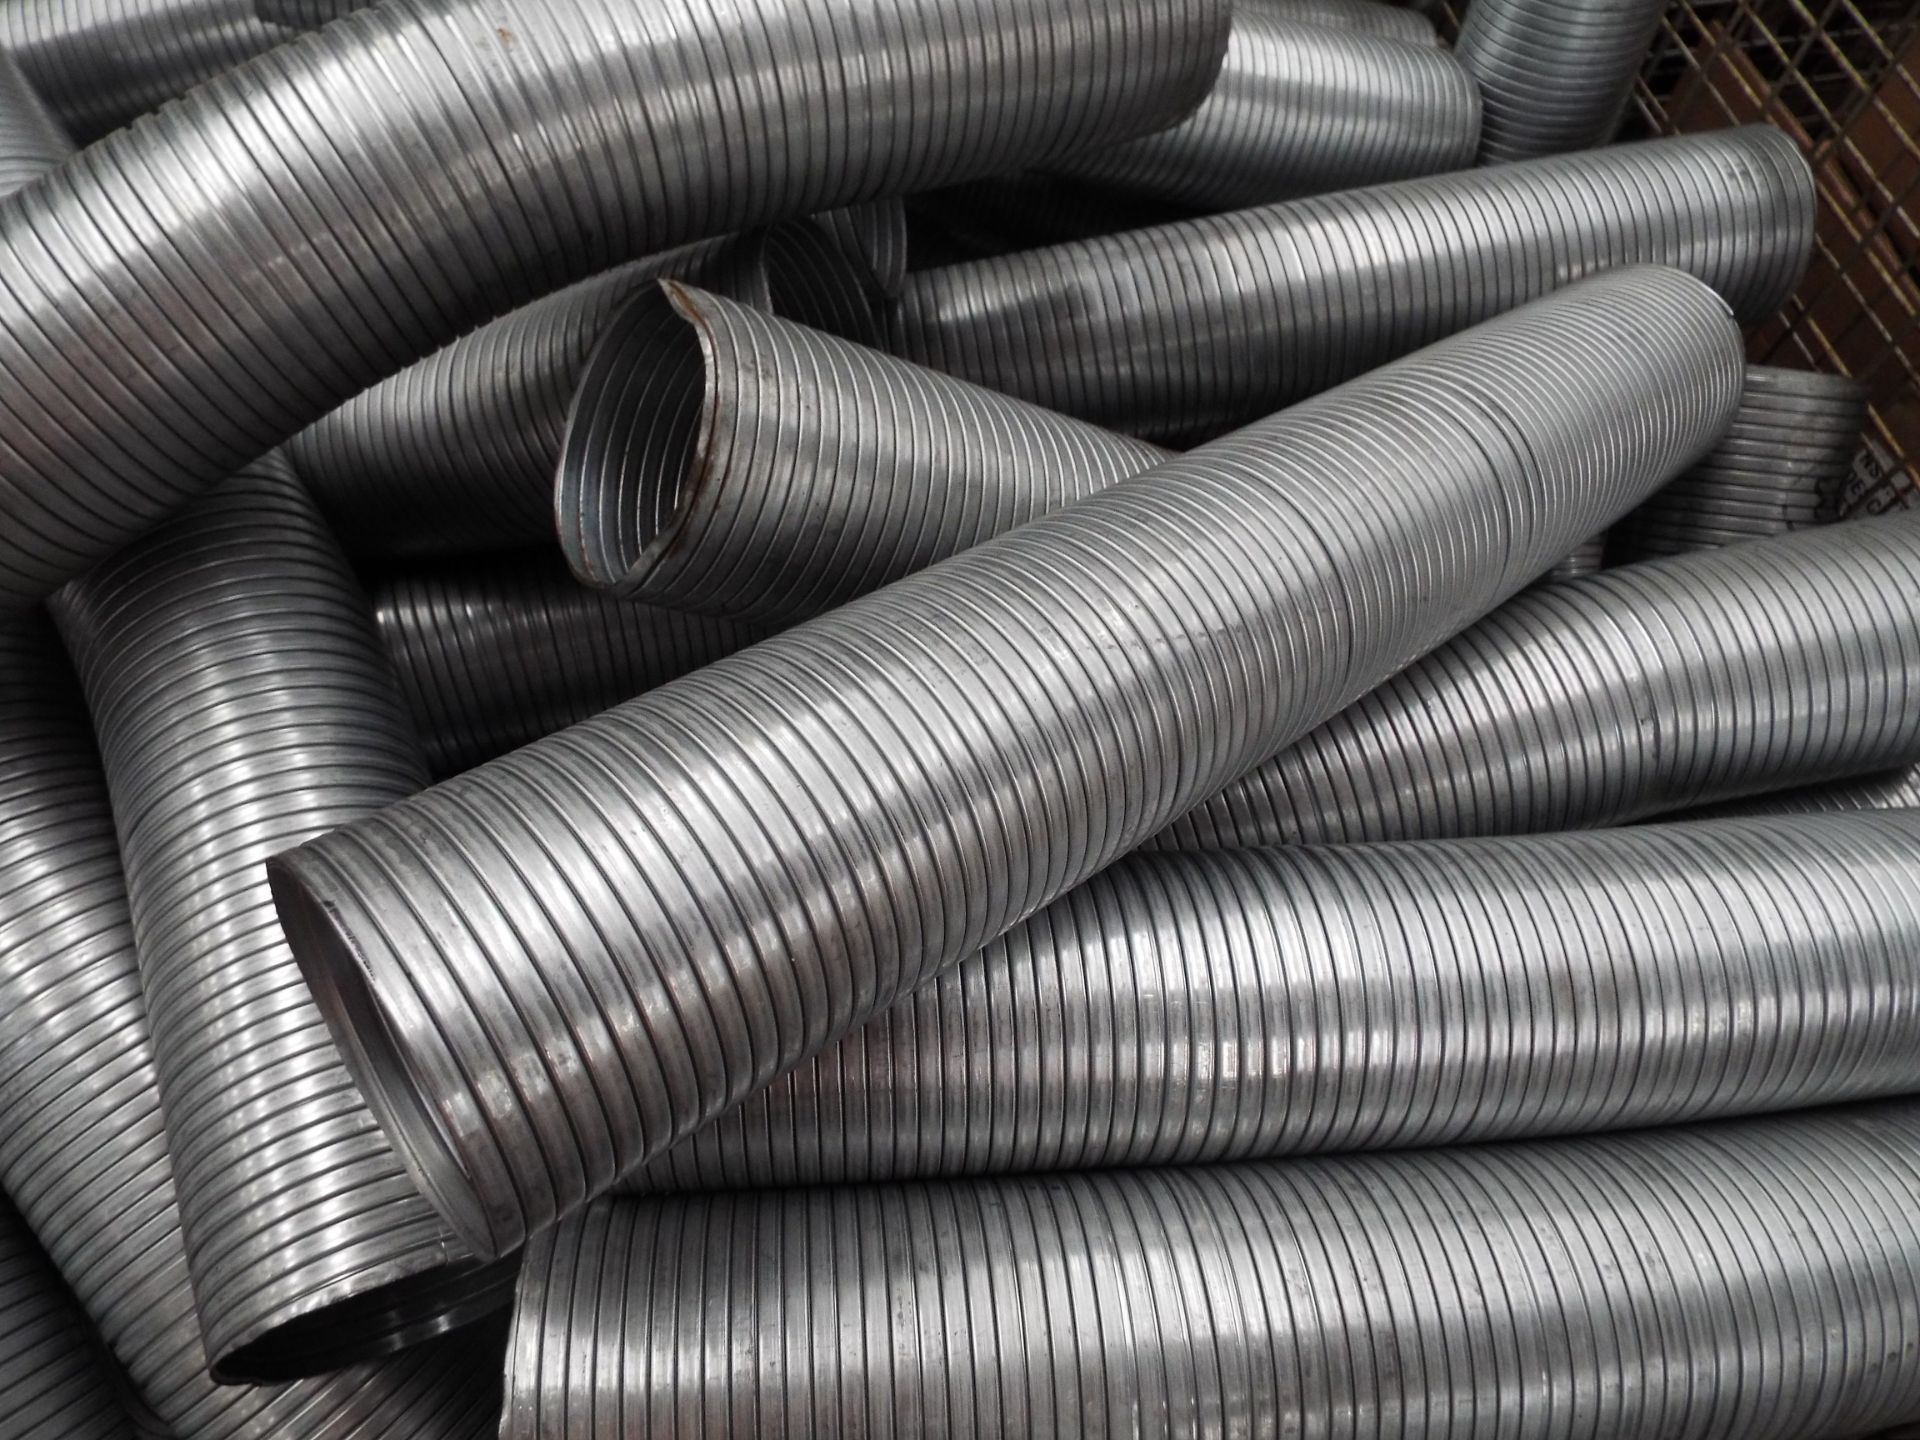 Approx 71 x Lengths of Metallic Tubing - Image 3 of 4